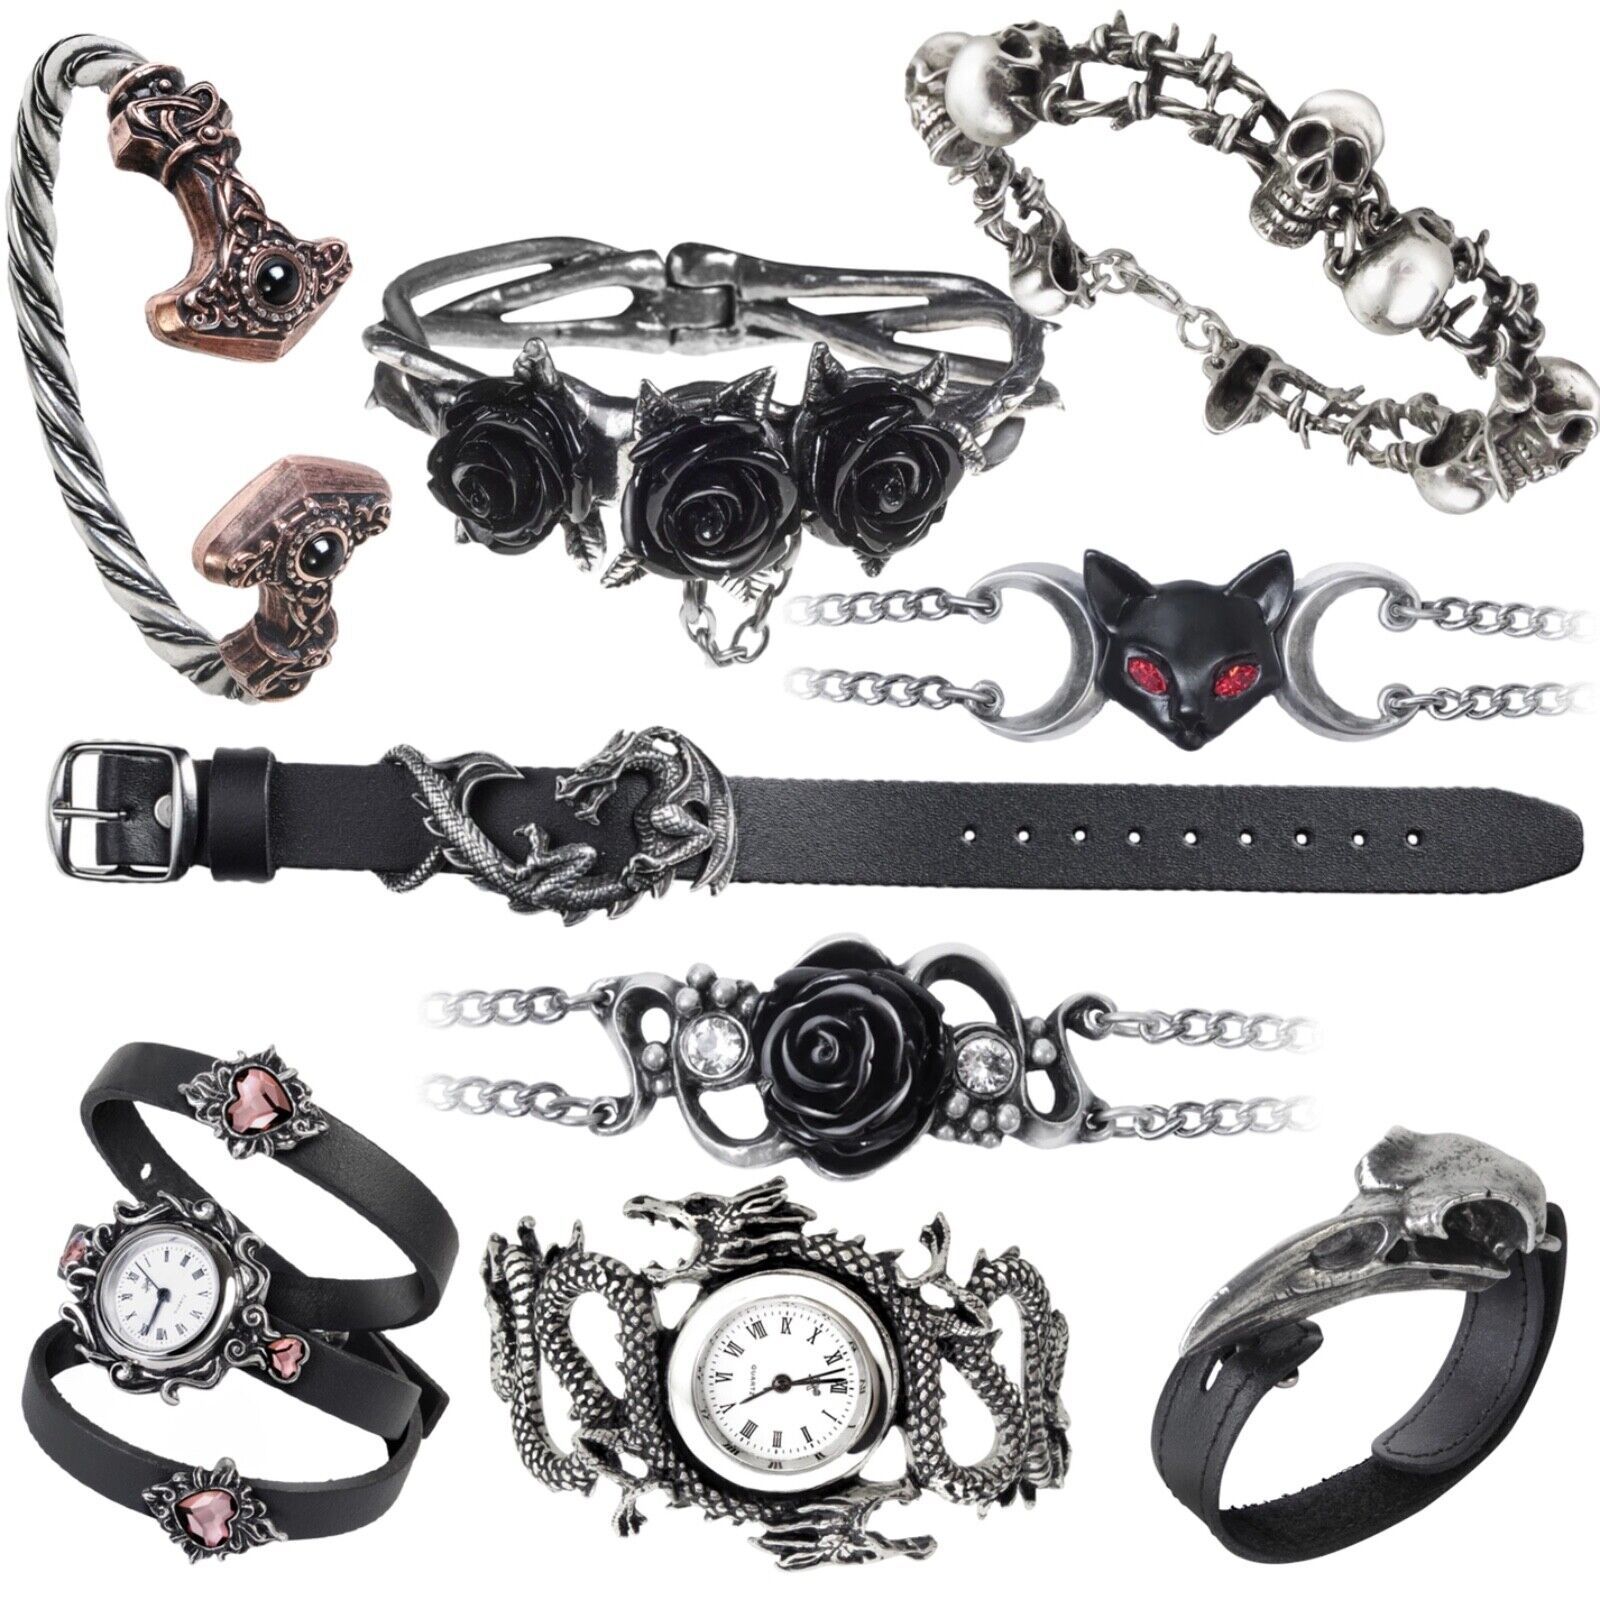 Alchemy Gothic Braclets Wriststraps Watches Bangles Jewerly YOU CHOOSE - £23.45 GBP - £54.72 GBP